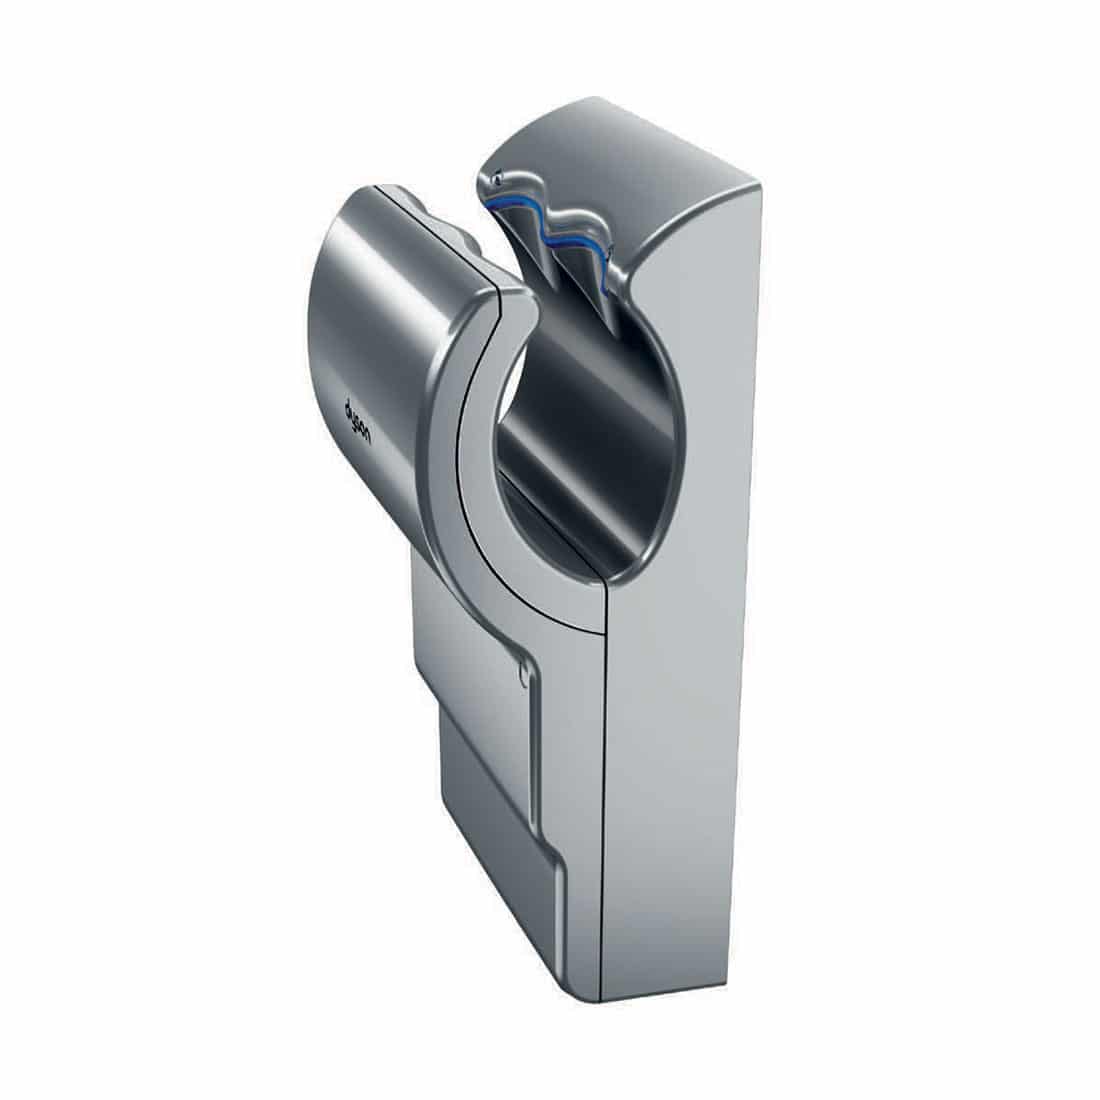 indhente log Avenue Dyson Airblade dB Hand Dryer - Striking Looks - Partition Plus